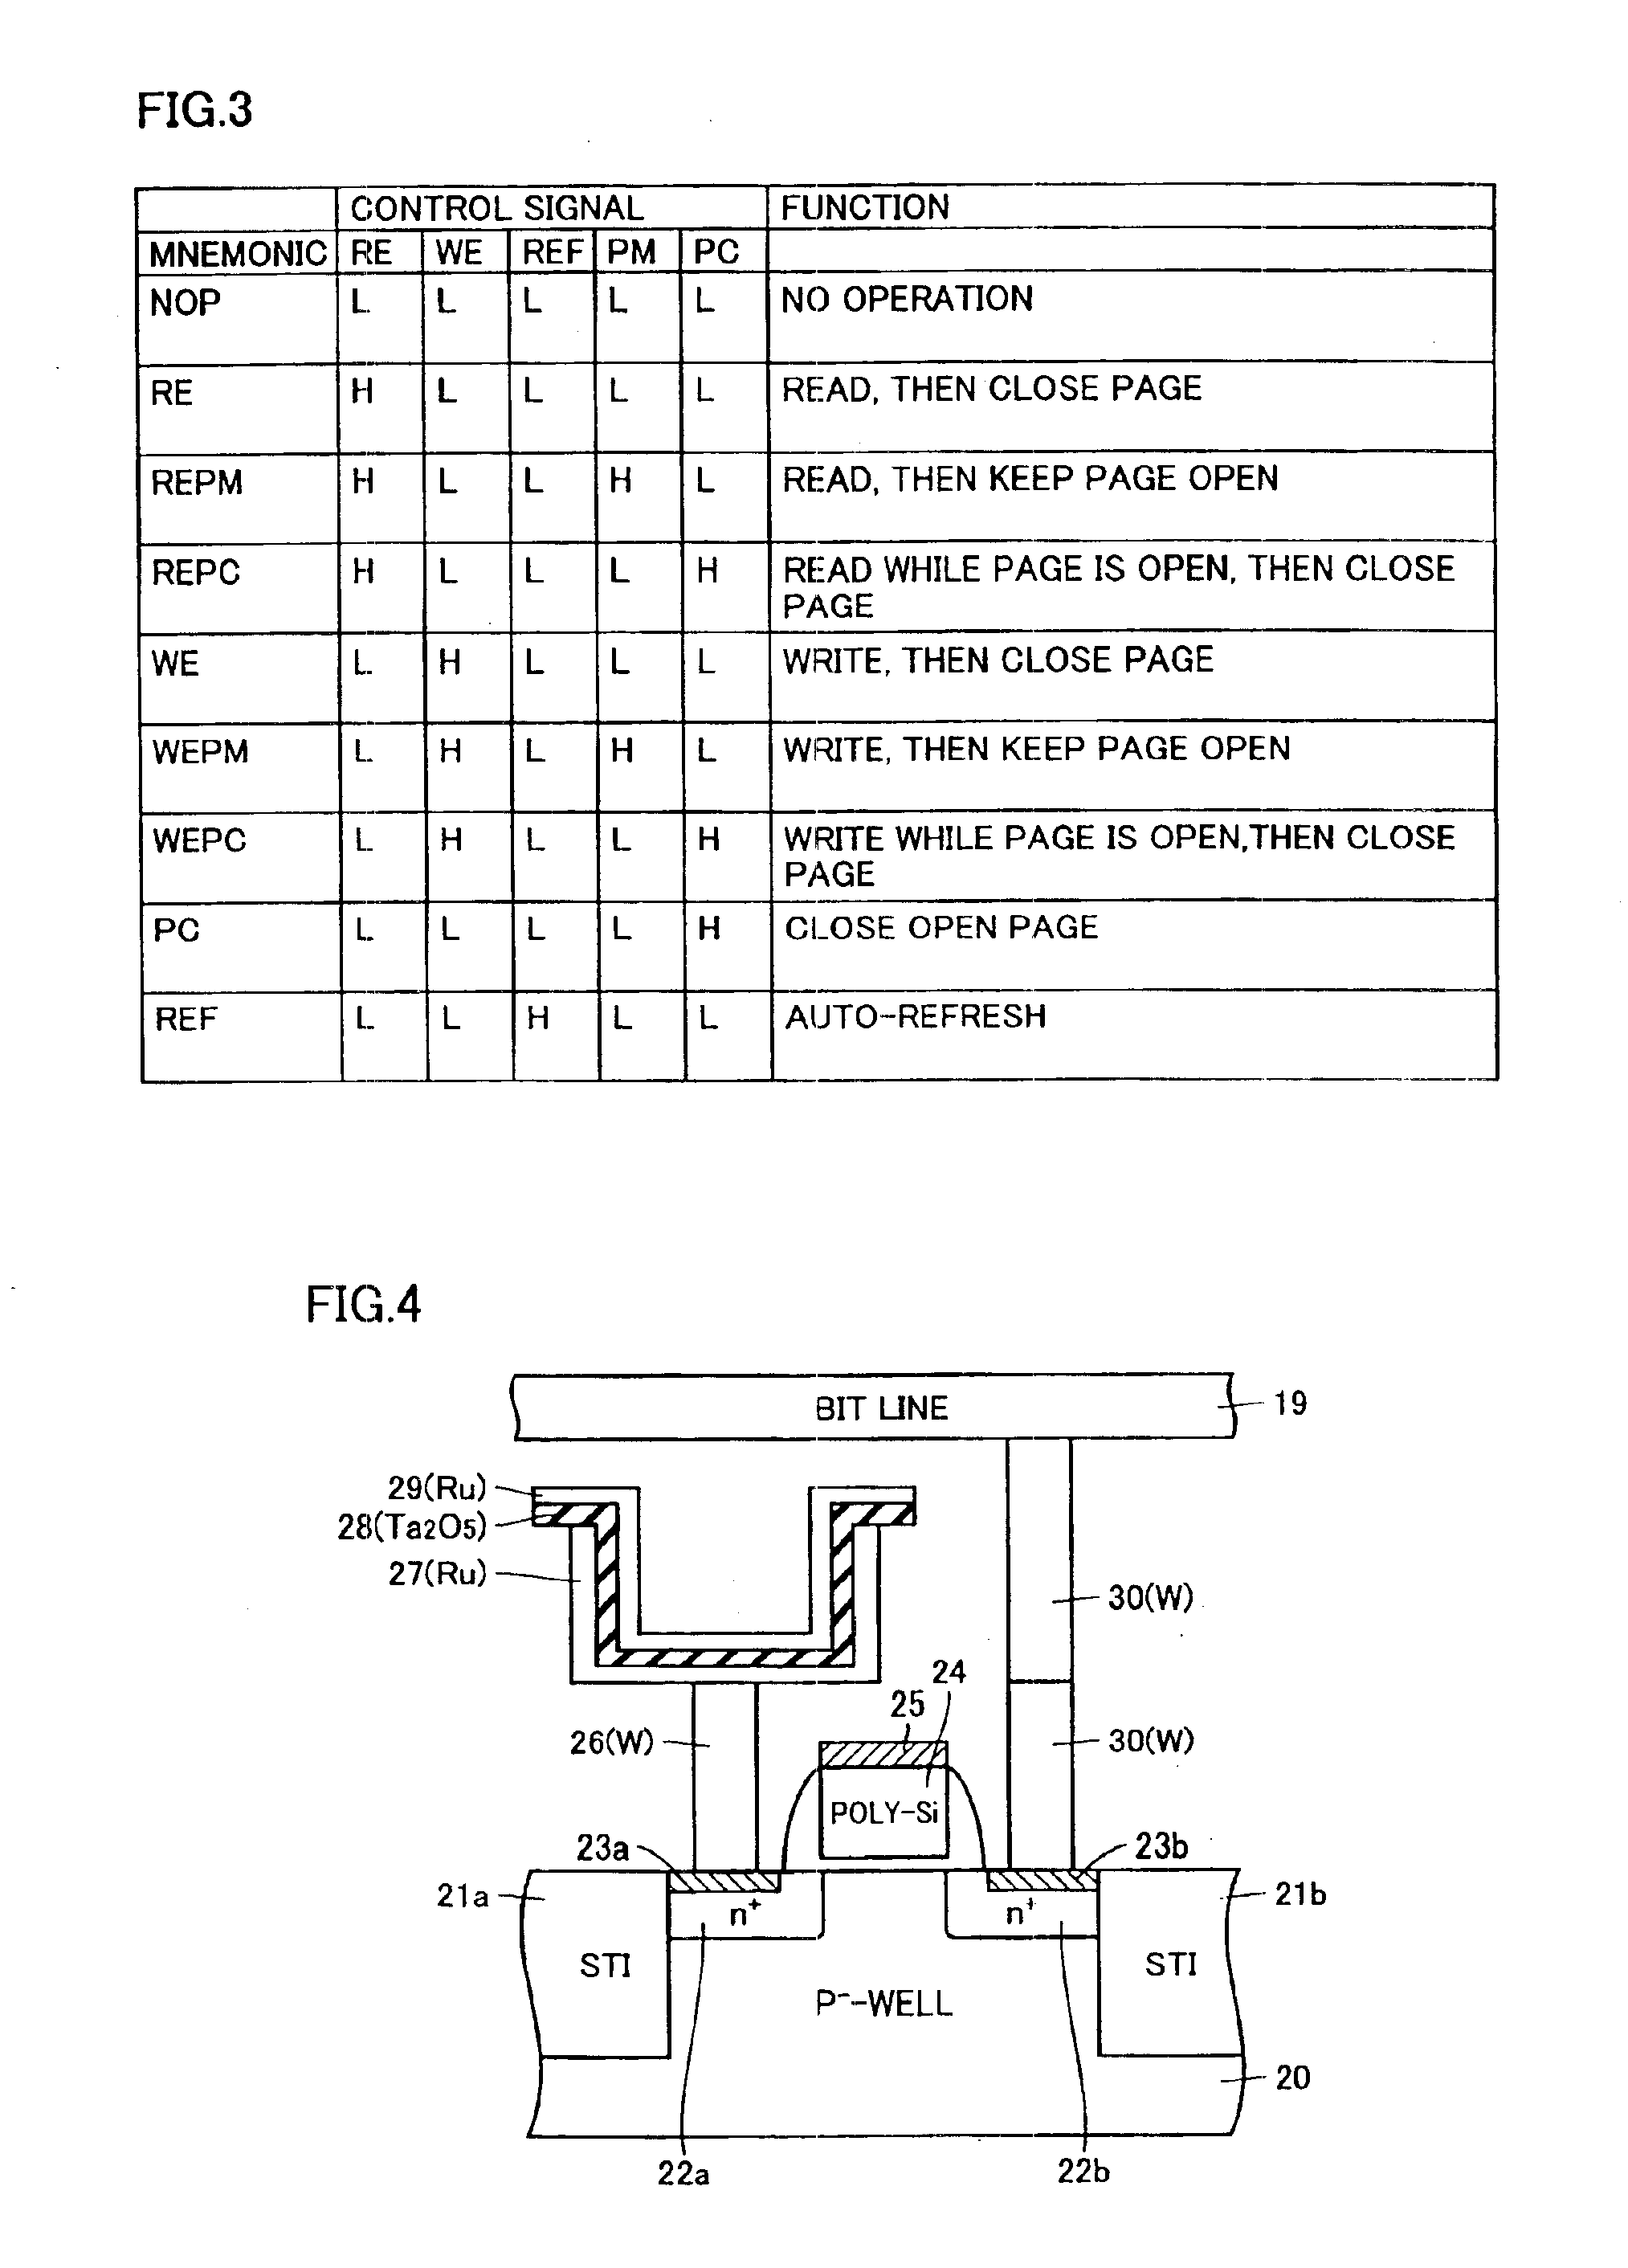 Pseudo-static synchronous semiconductor memory device